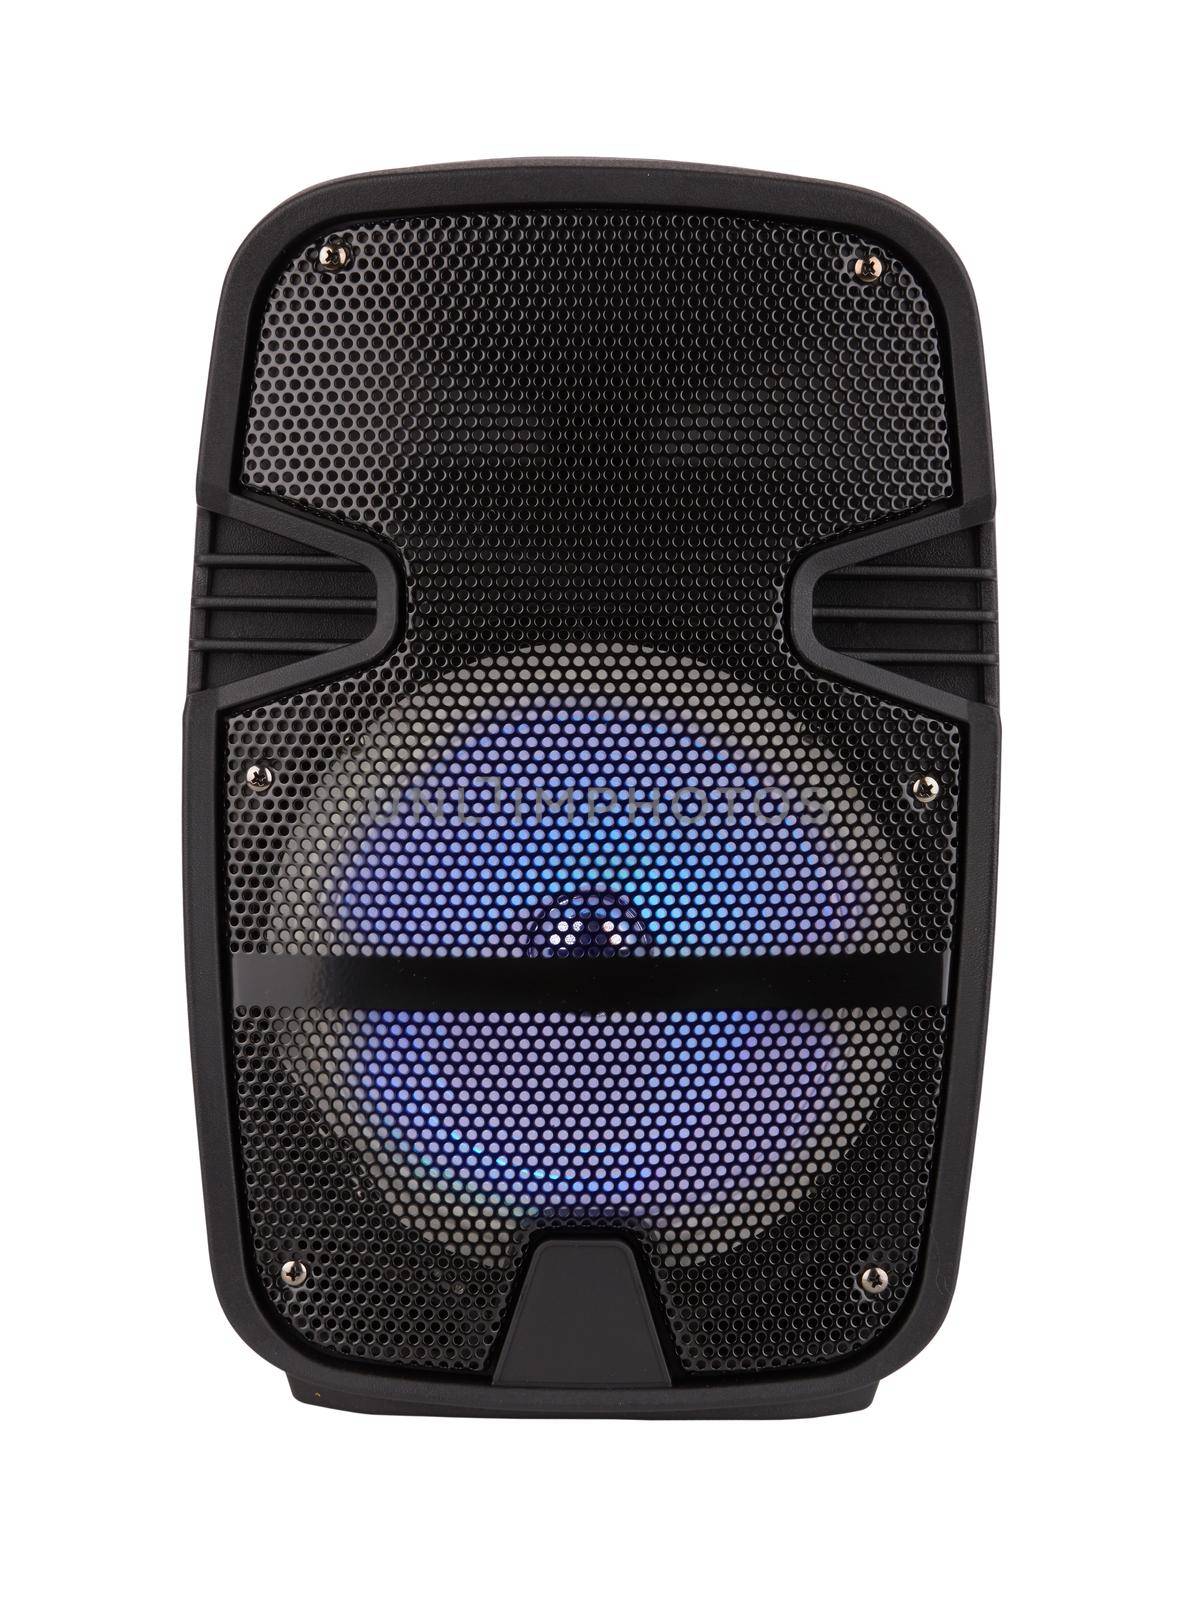 Portable speaker isolated by pioneer111